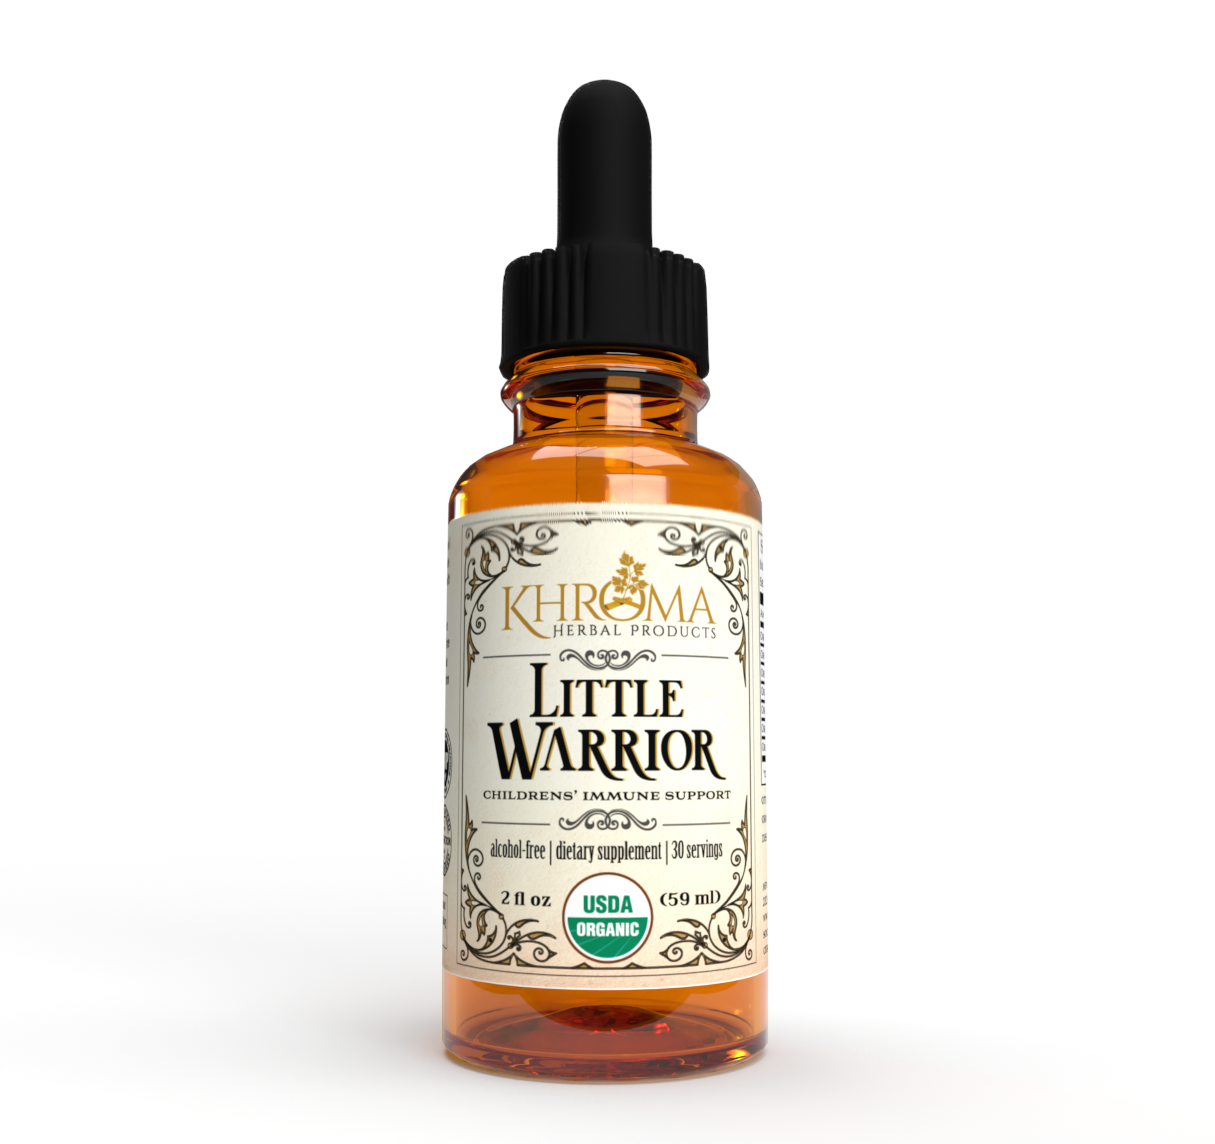 LITTLE WARRIOR - For Your Child's Immune System